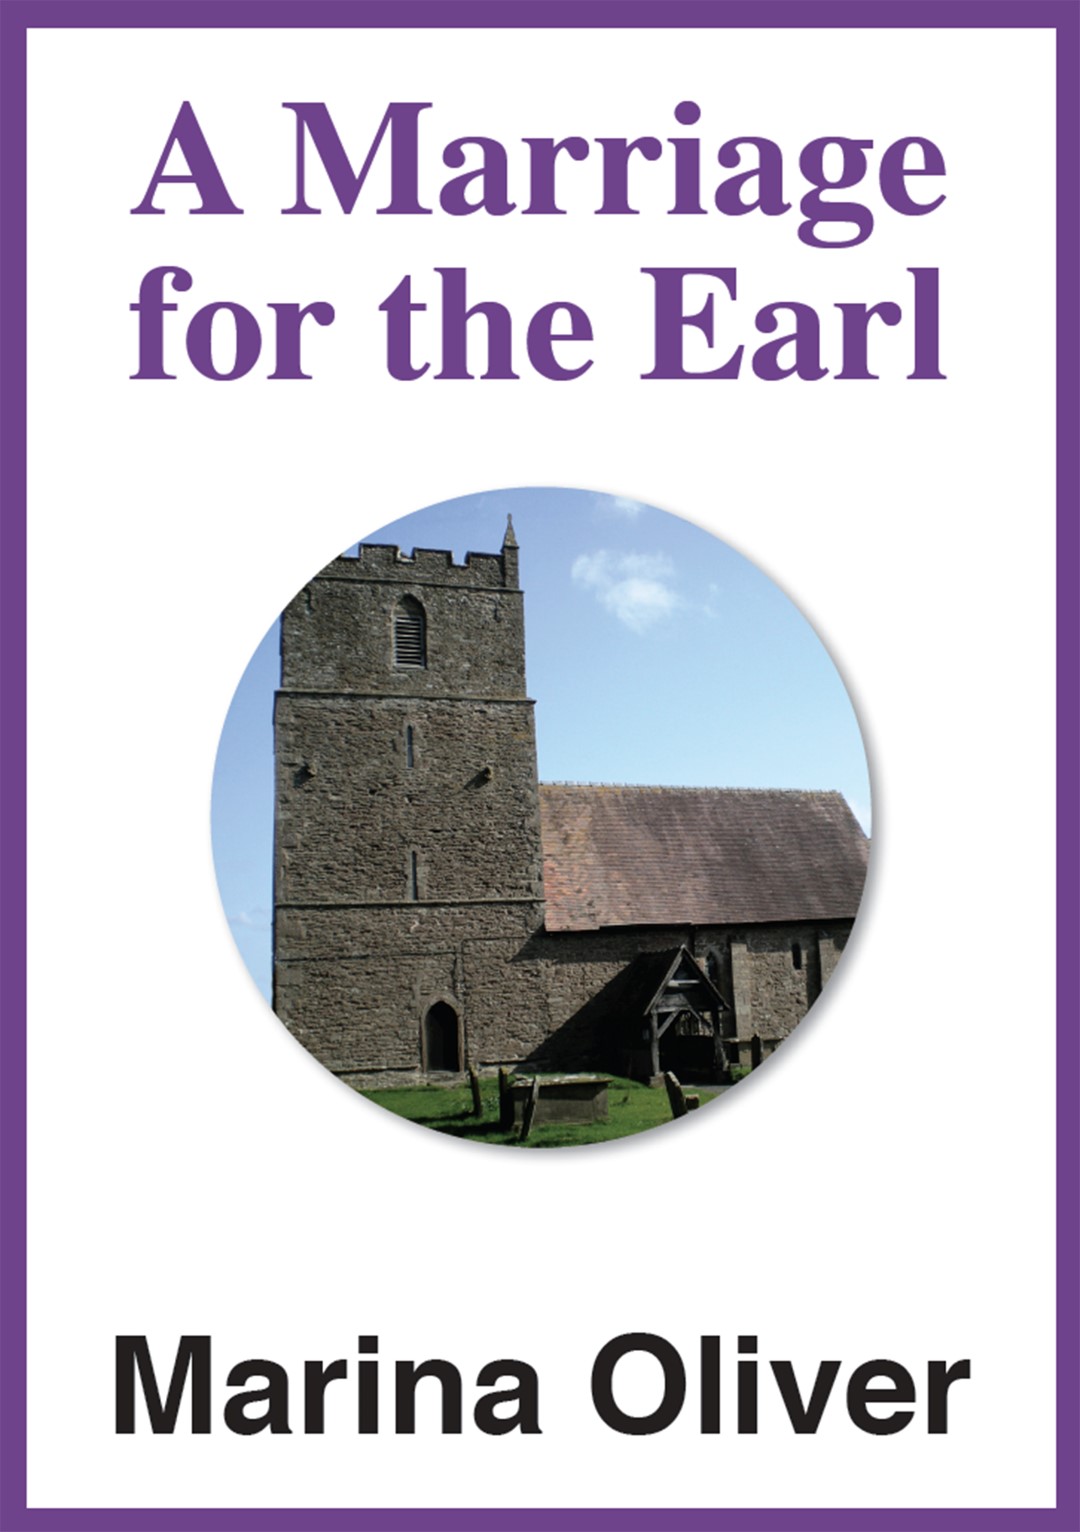 Amarriage for the Earl Ebook